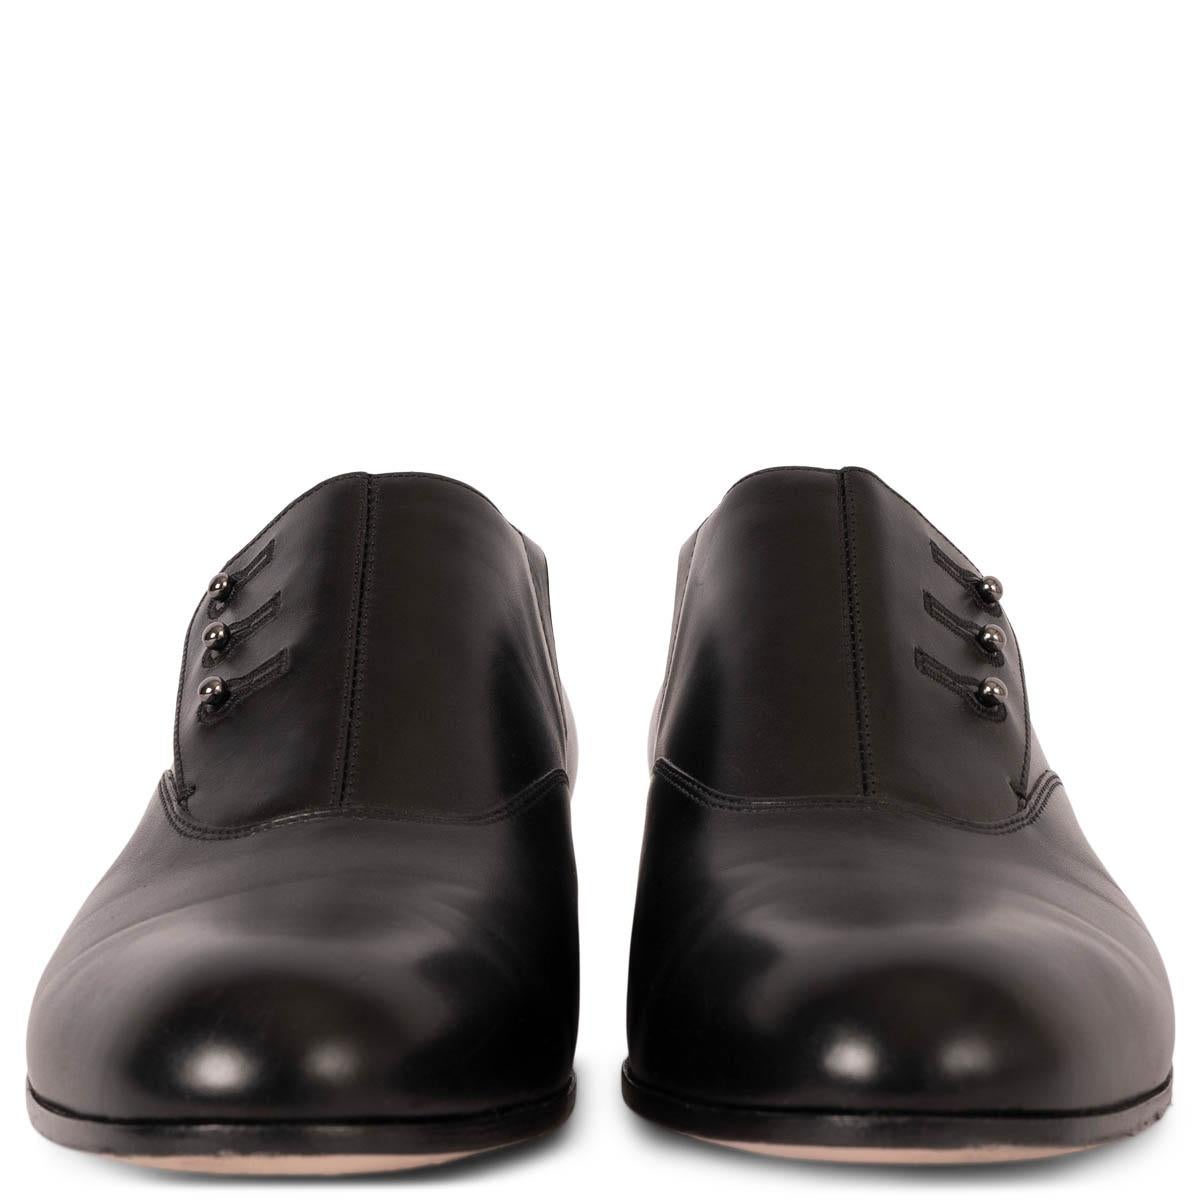 100% authentic Giorgio Armani buttoned Oxford shoes in black smooth leather with elastic panel on the inside. Have been worn and are in excellent condition. Come with dust bag. 

Measurements
Imprinted Size	39
Shoe Size	39
Inside Sole	26cm